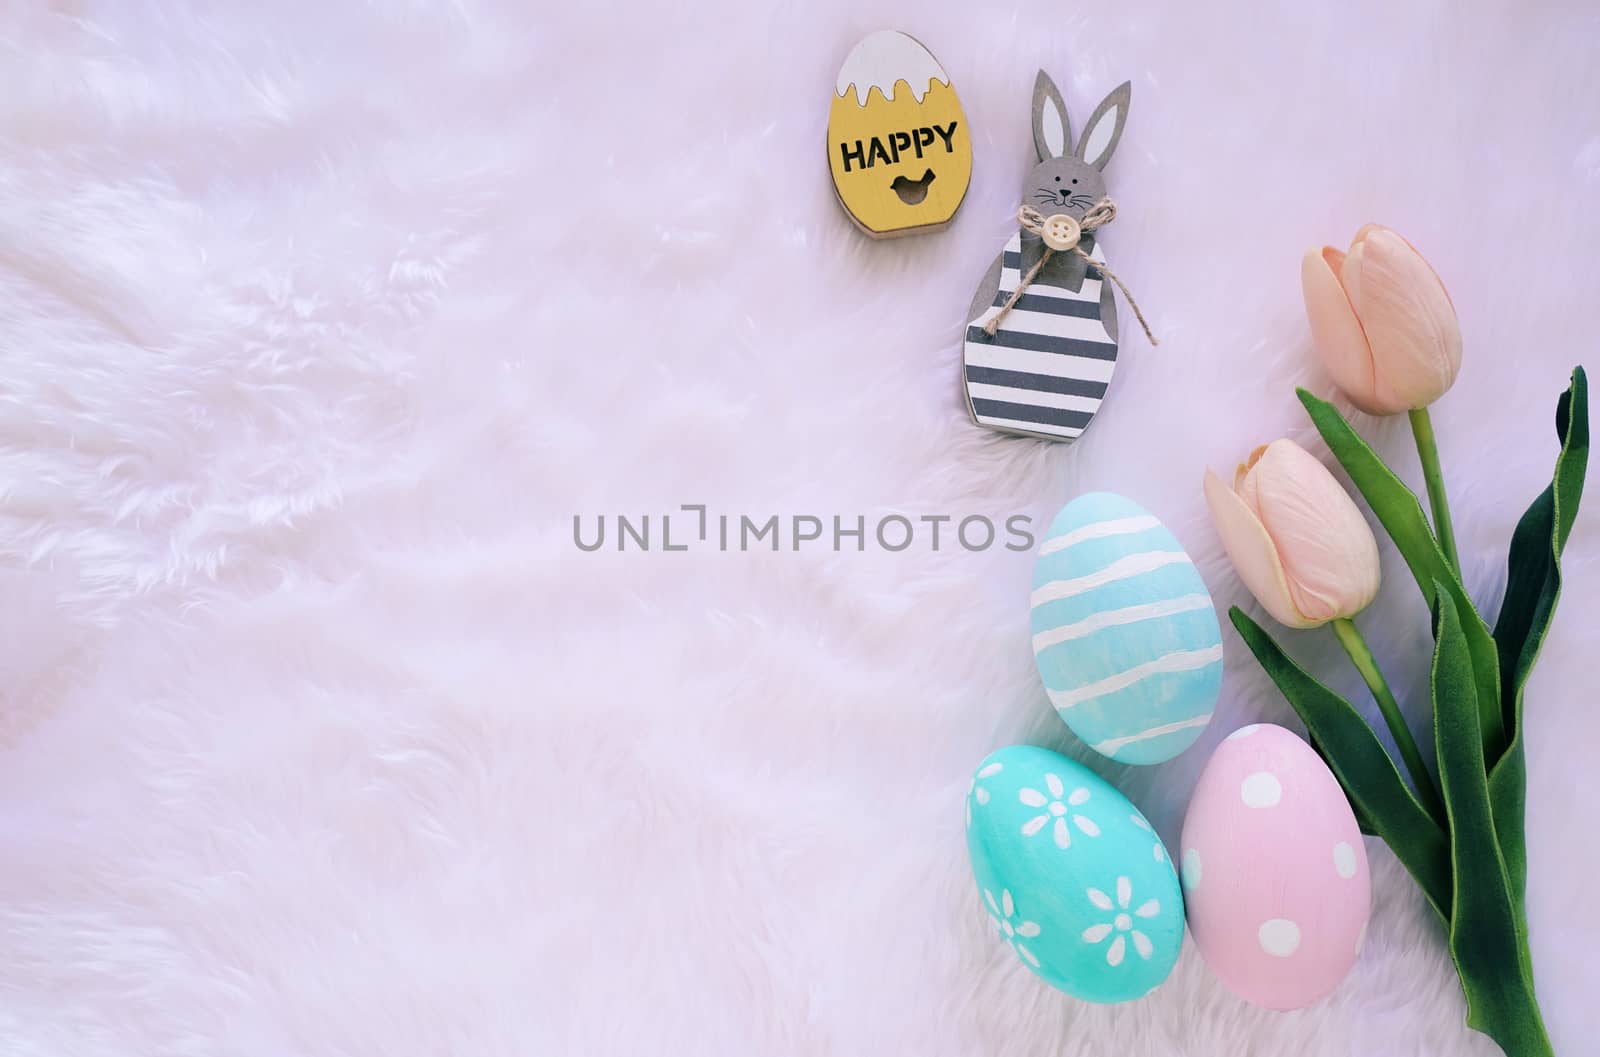 Happy Easter concept with wooden bunny and colorful easter eggs on white fur background and pink tulips. Top view with copy space 